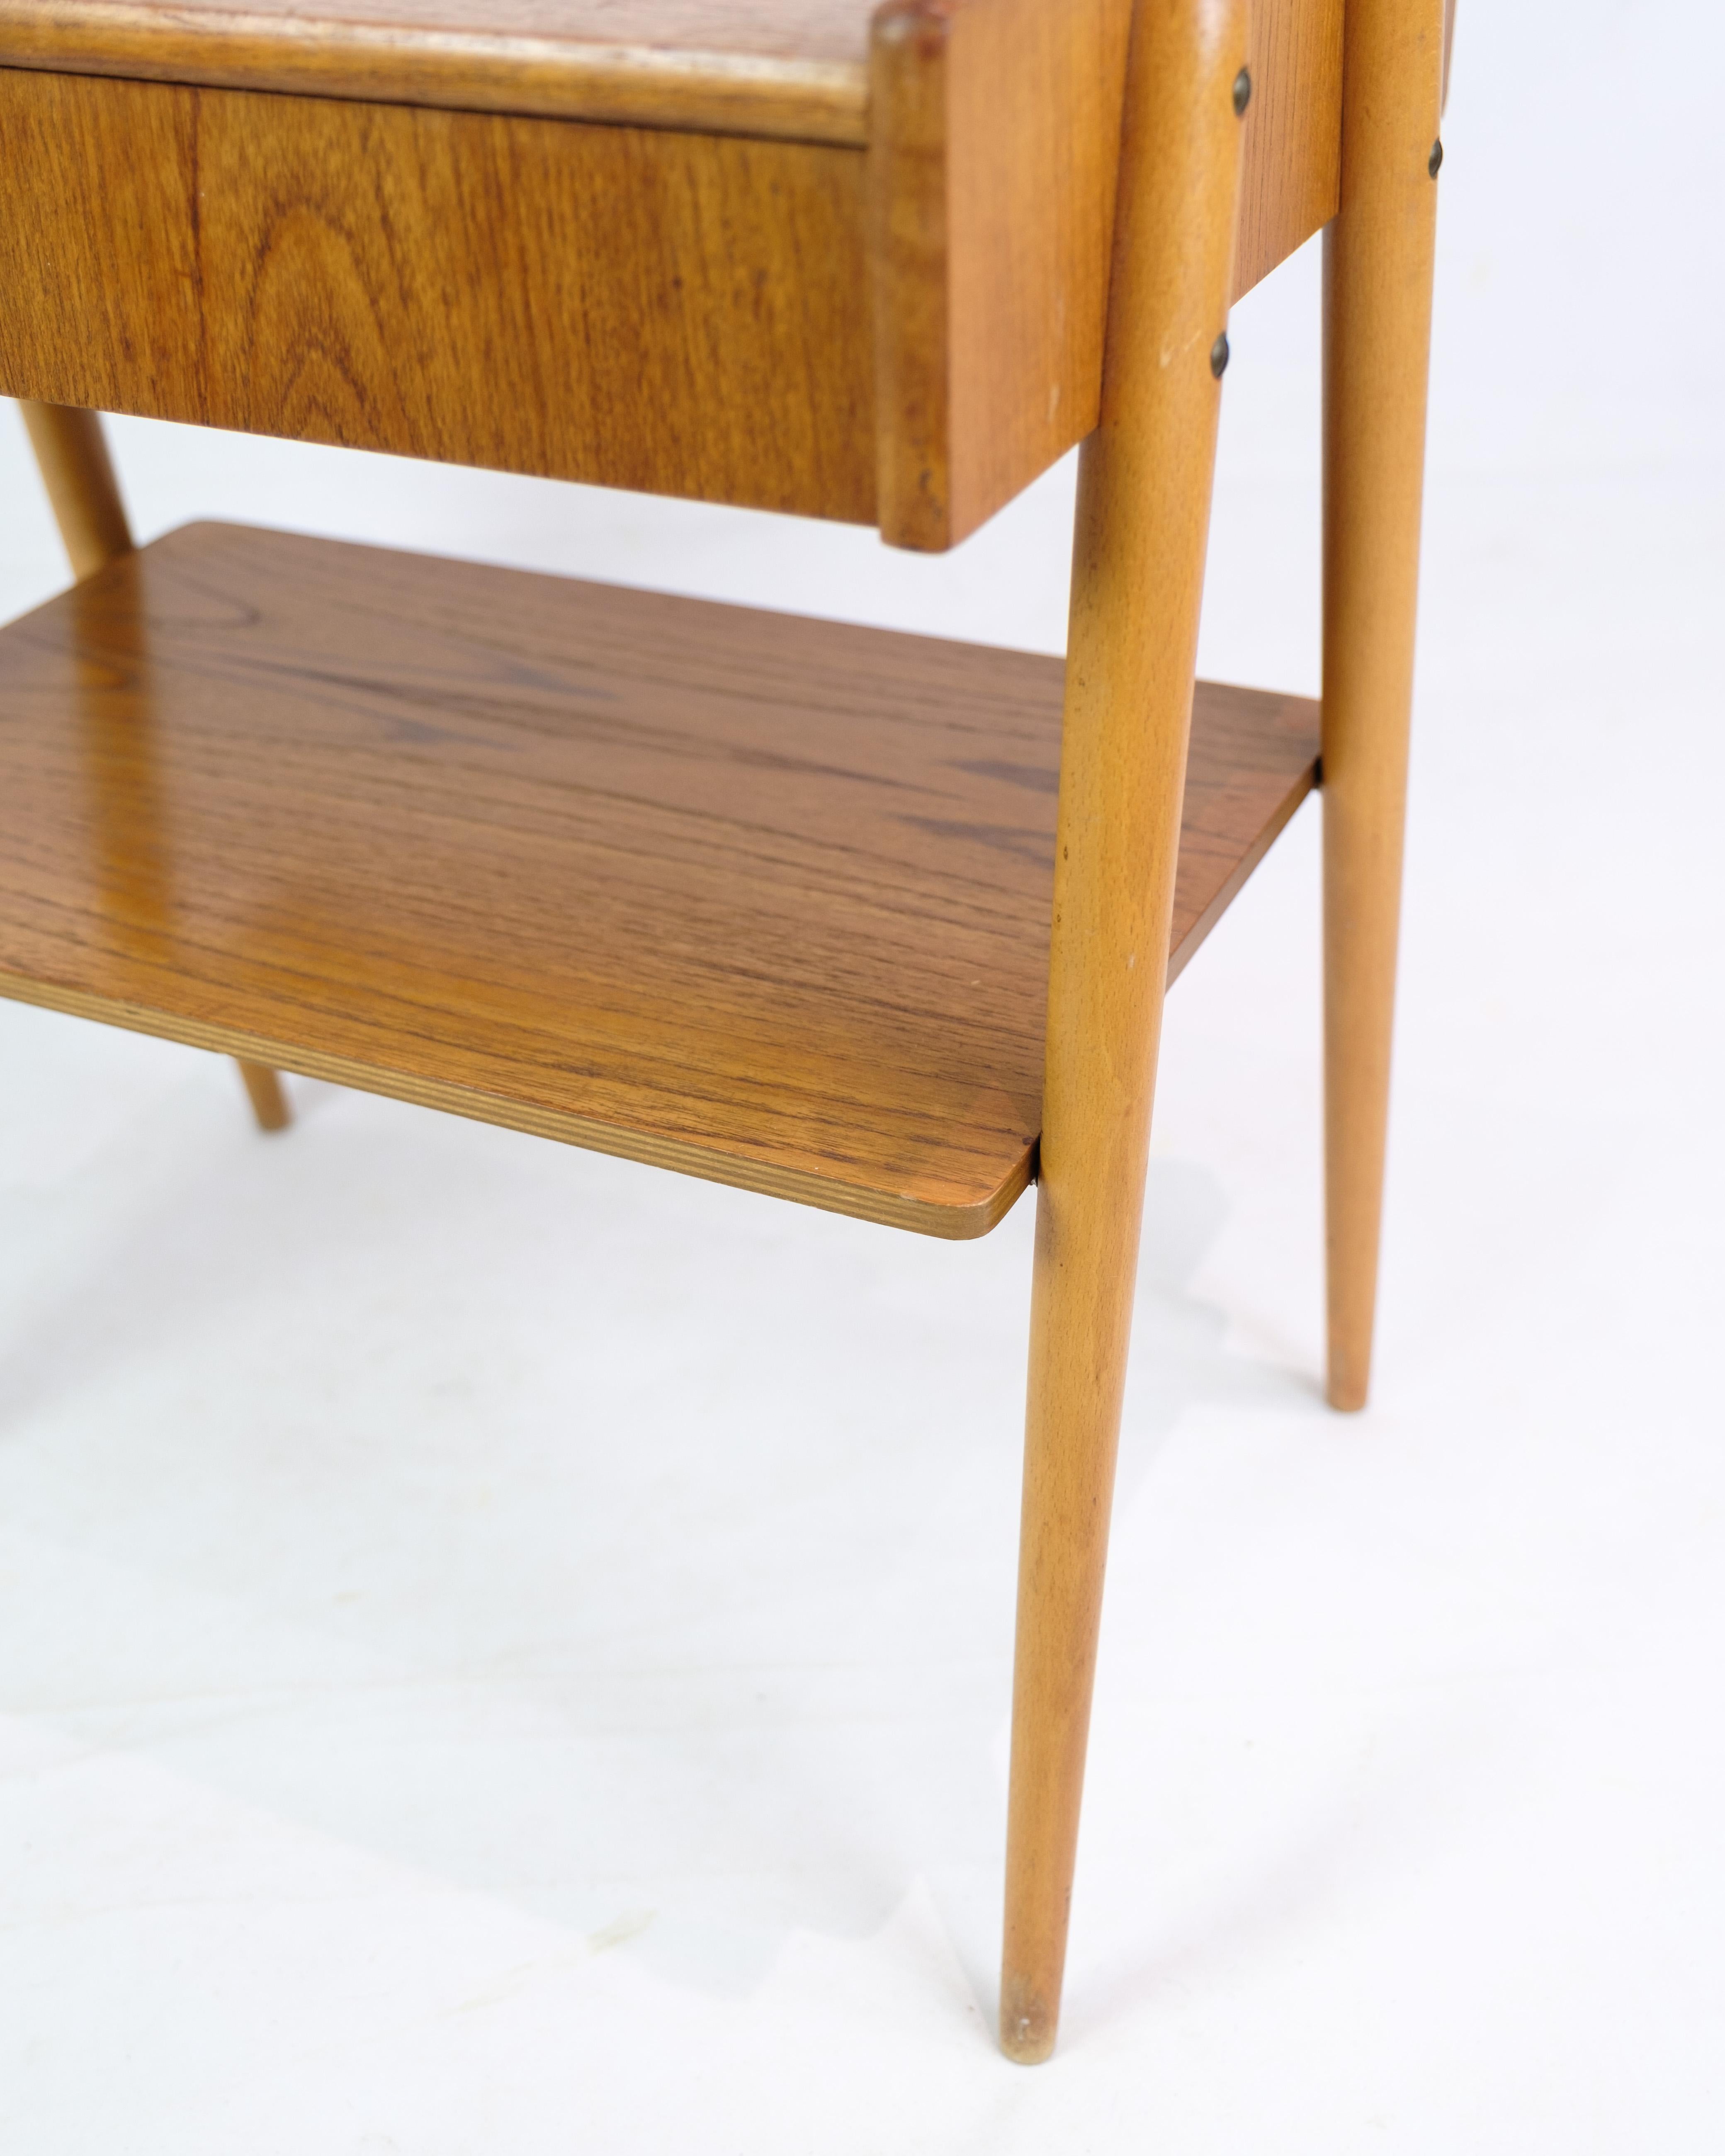 Set of Nightstands In Teak, By AB Carlström & Co Furniture Factory From 1950s For Sale 1